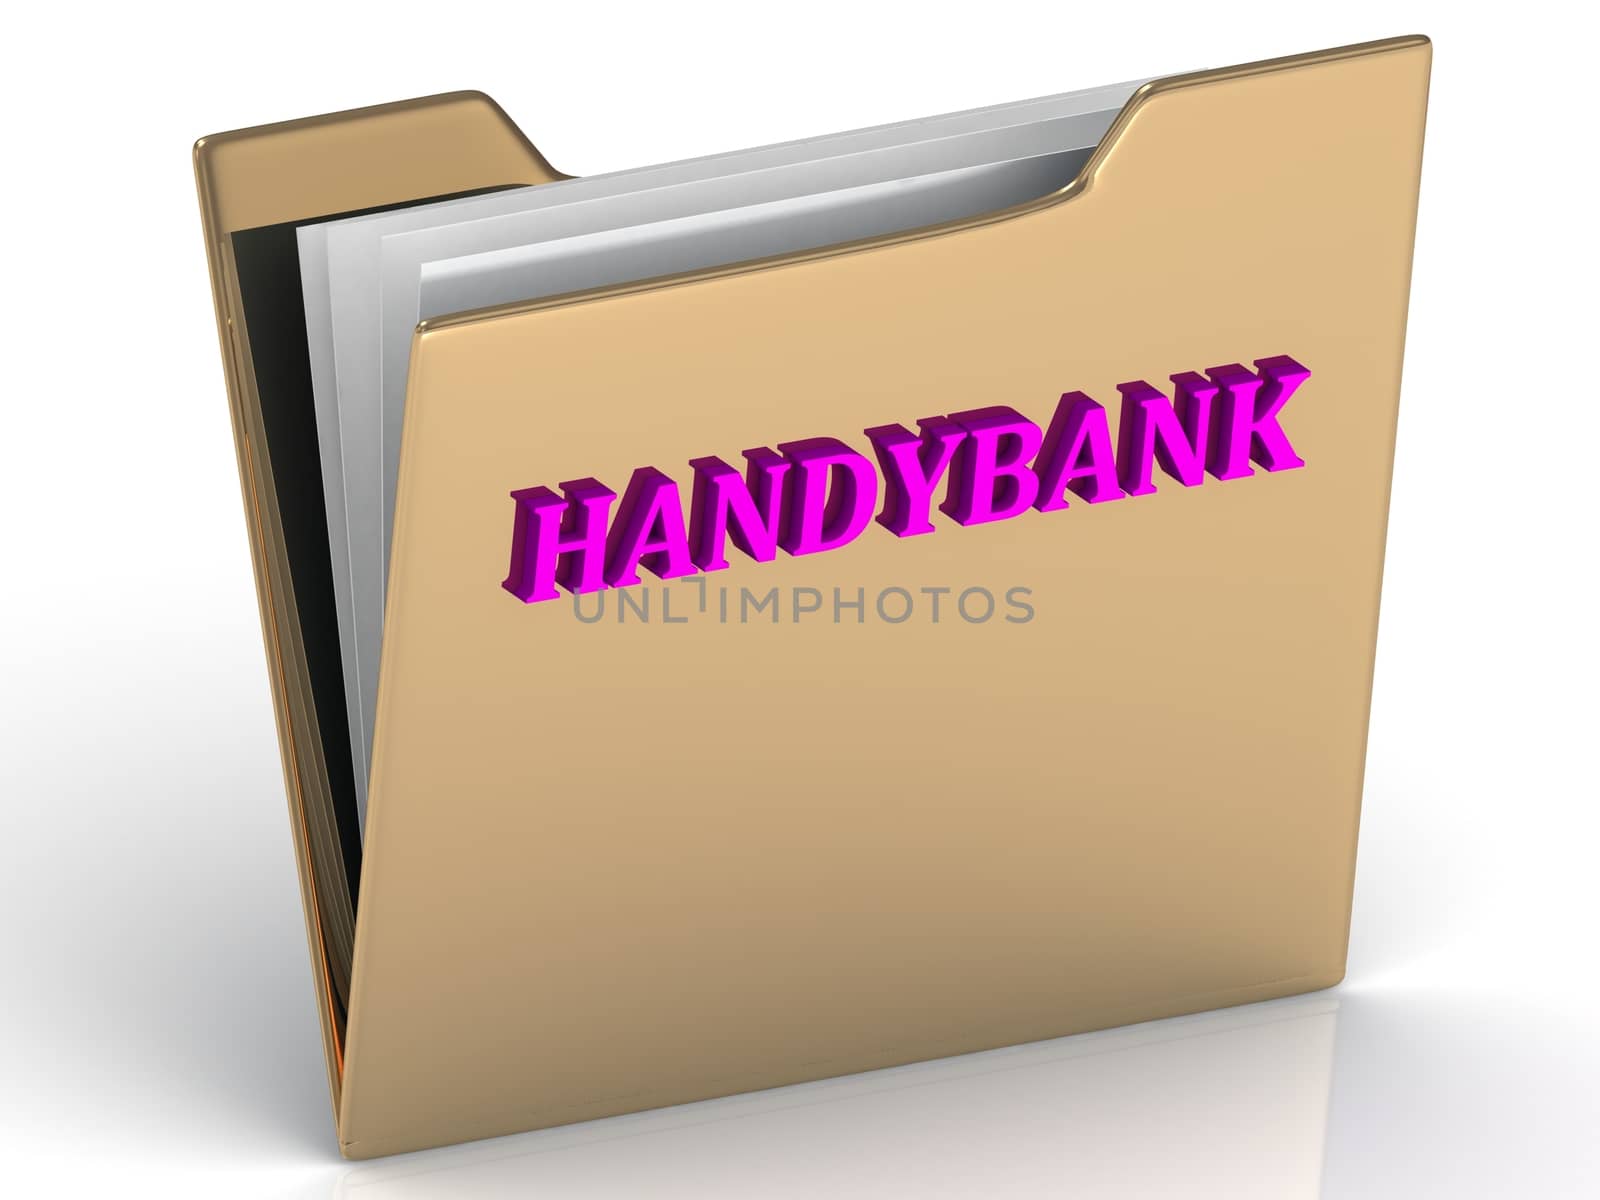 HANDYBANK - bright color letters on a gold folder on a white background